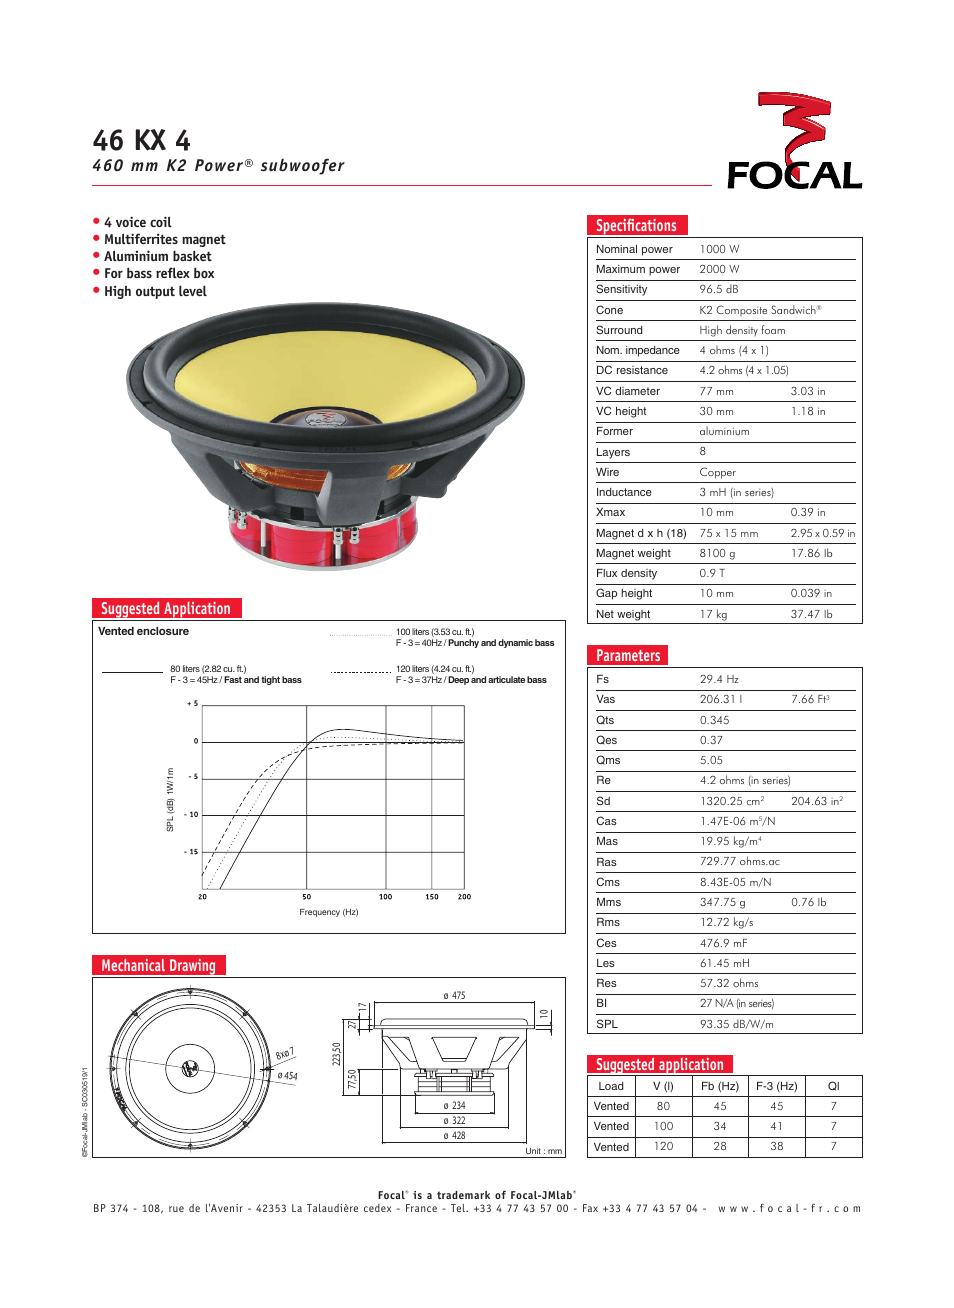 Focal K2 Power 46 KX 4 User Manual | 1 page